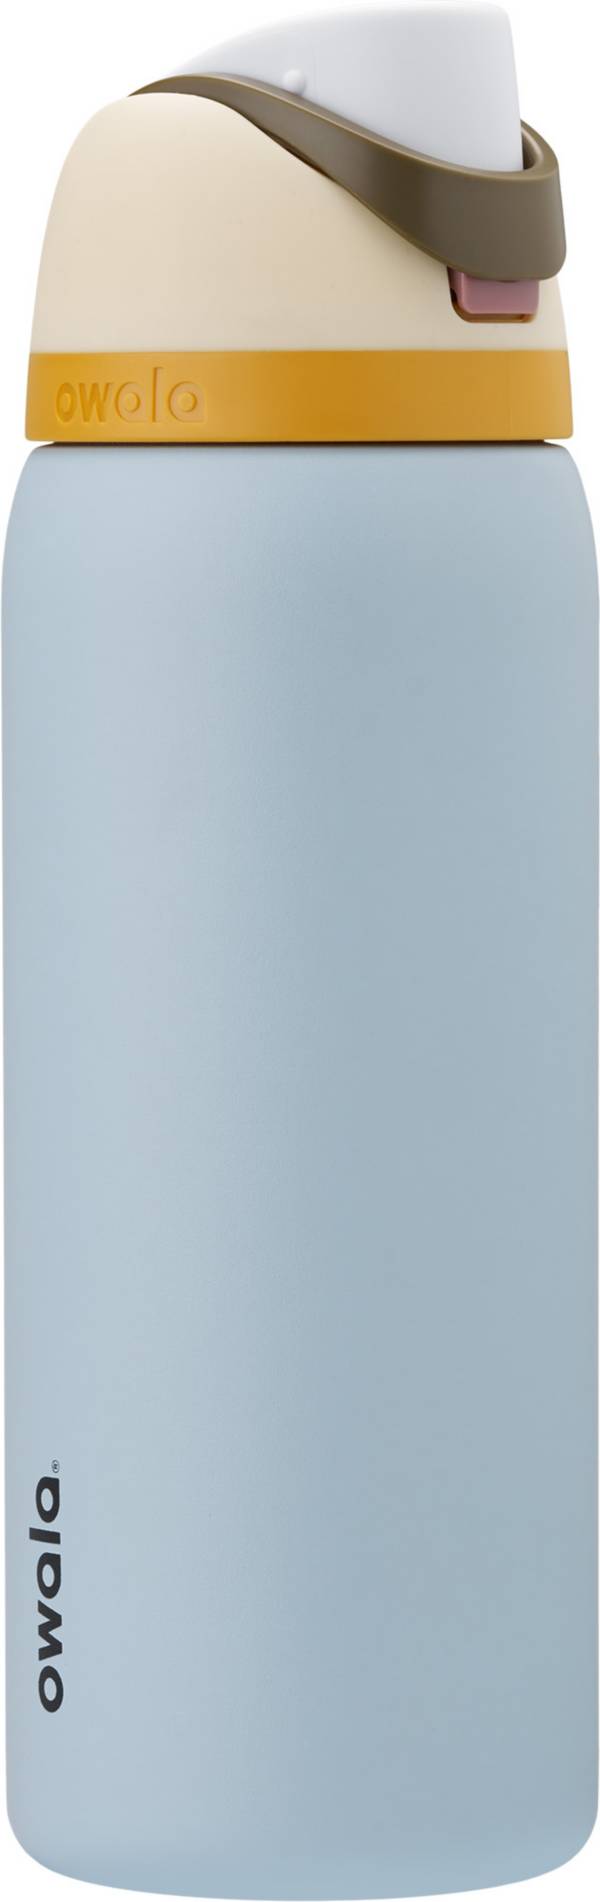 Owala 32 oz. FreeSip Stainless Steel Water Bottle product image